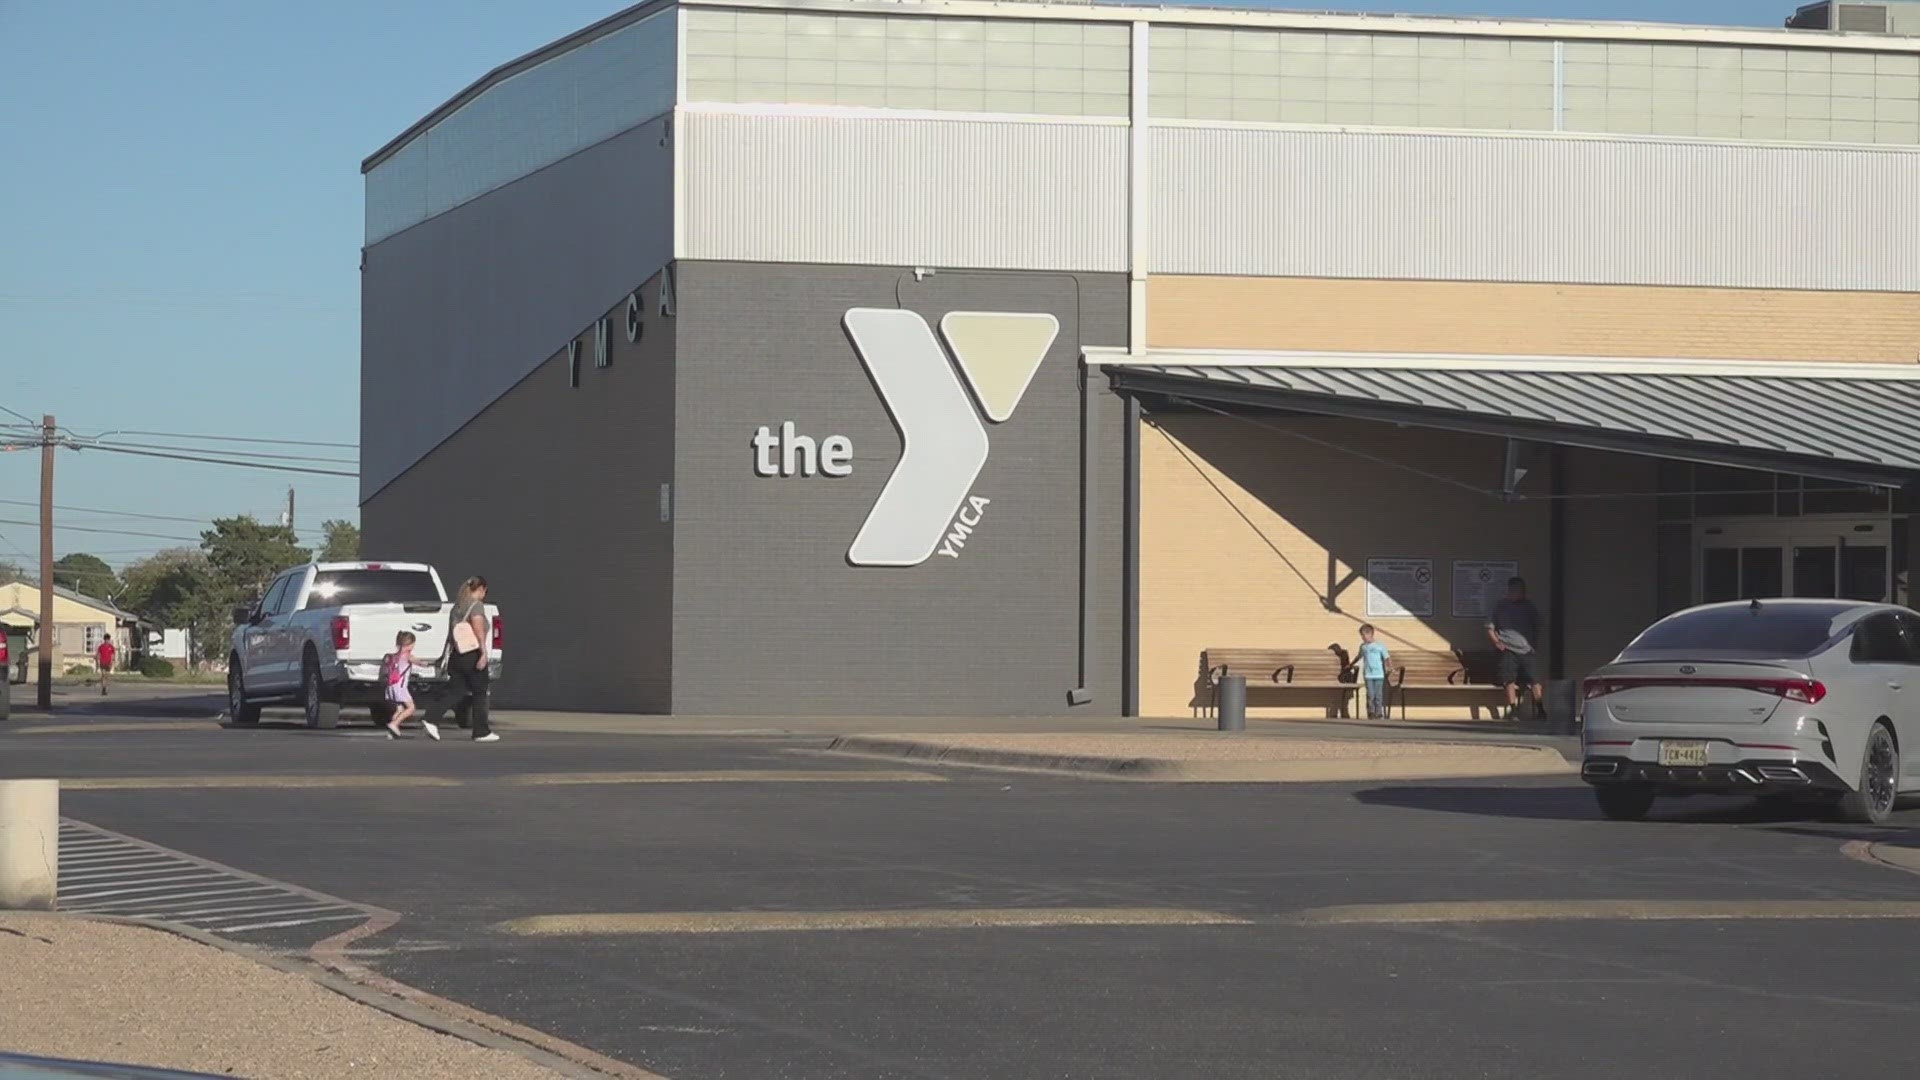 Northwest Midlanders are concerned about traffic safety with the current road infrastructure. Midland YMCA is looking to increase afterschool care for the community.